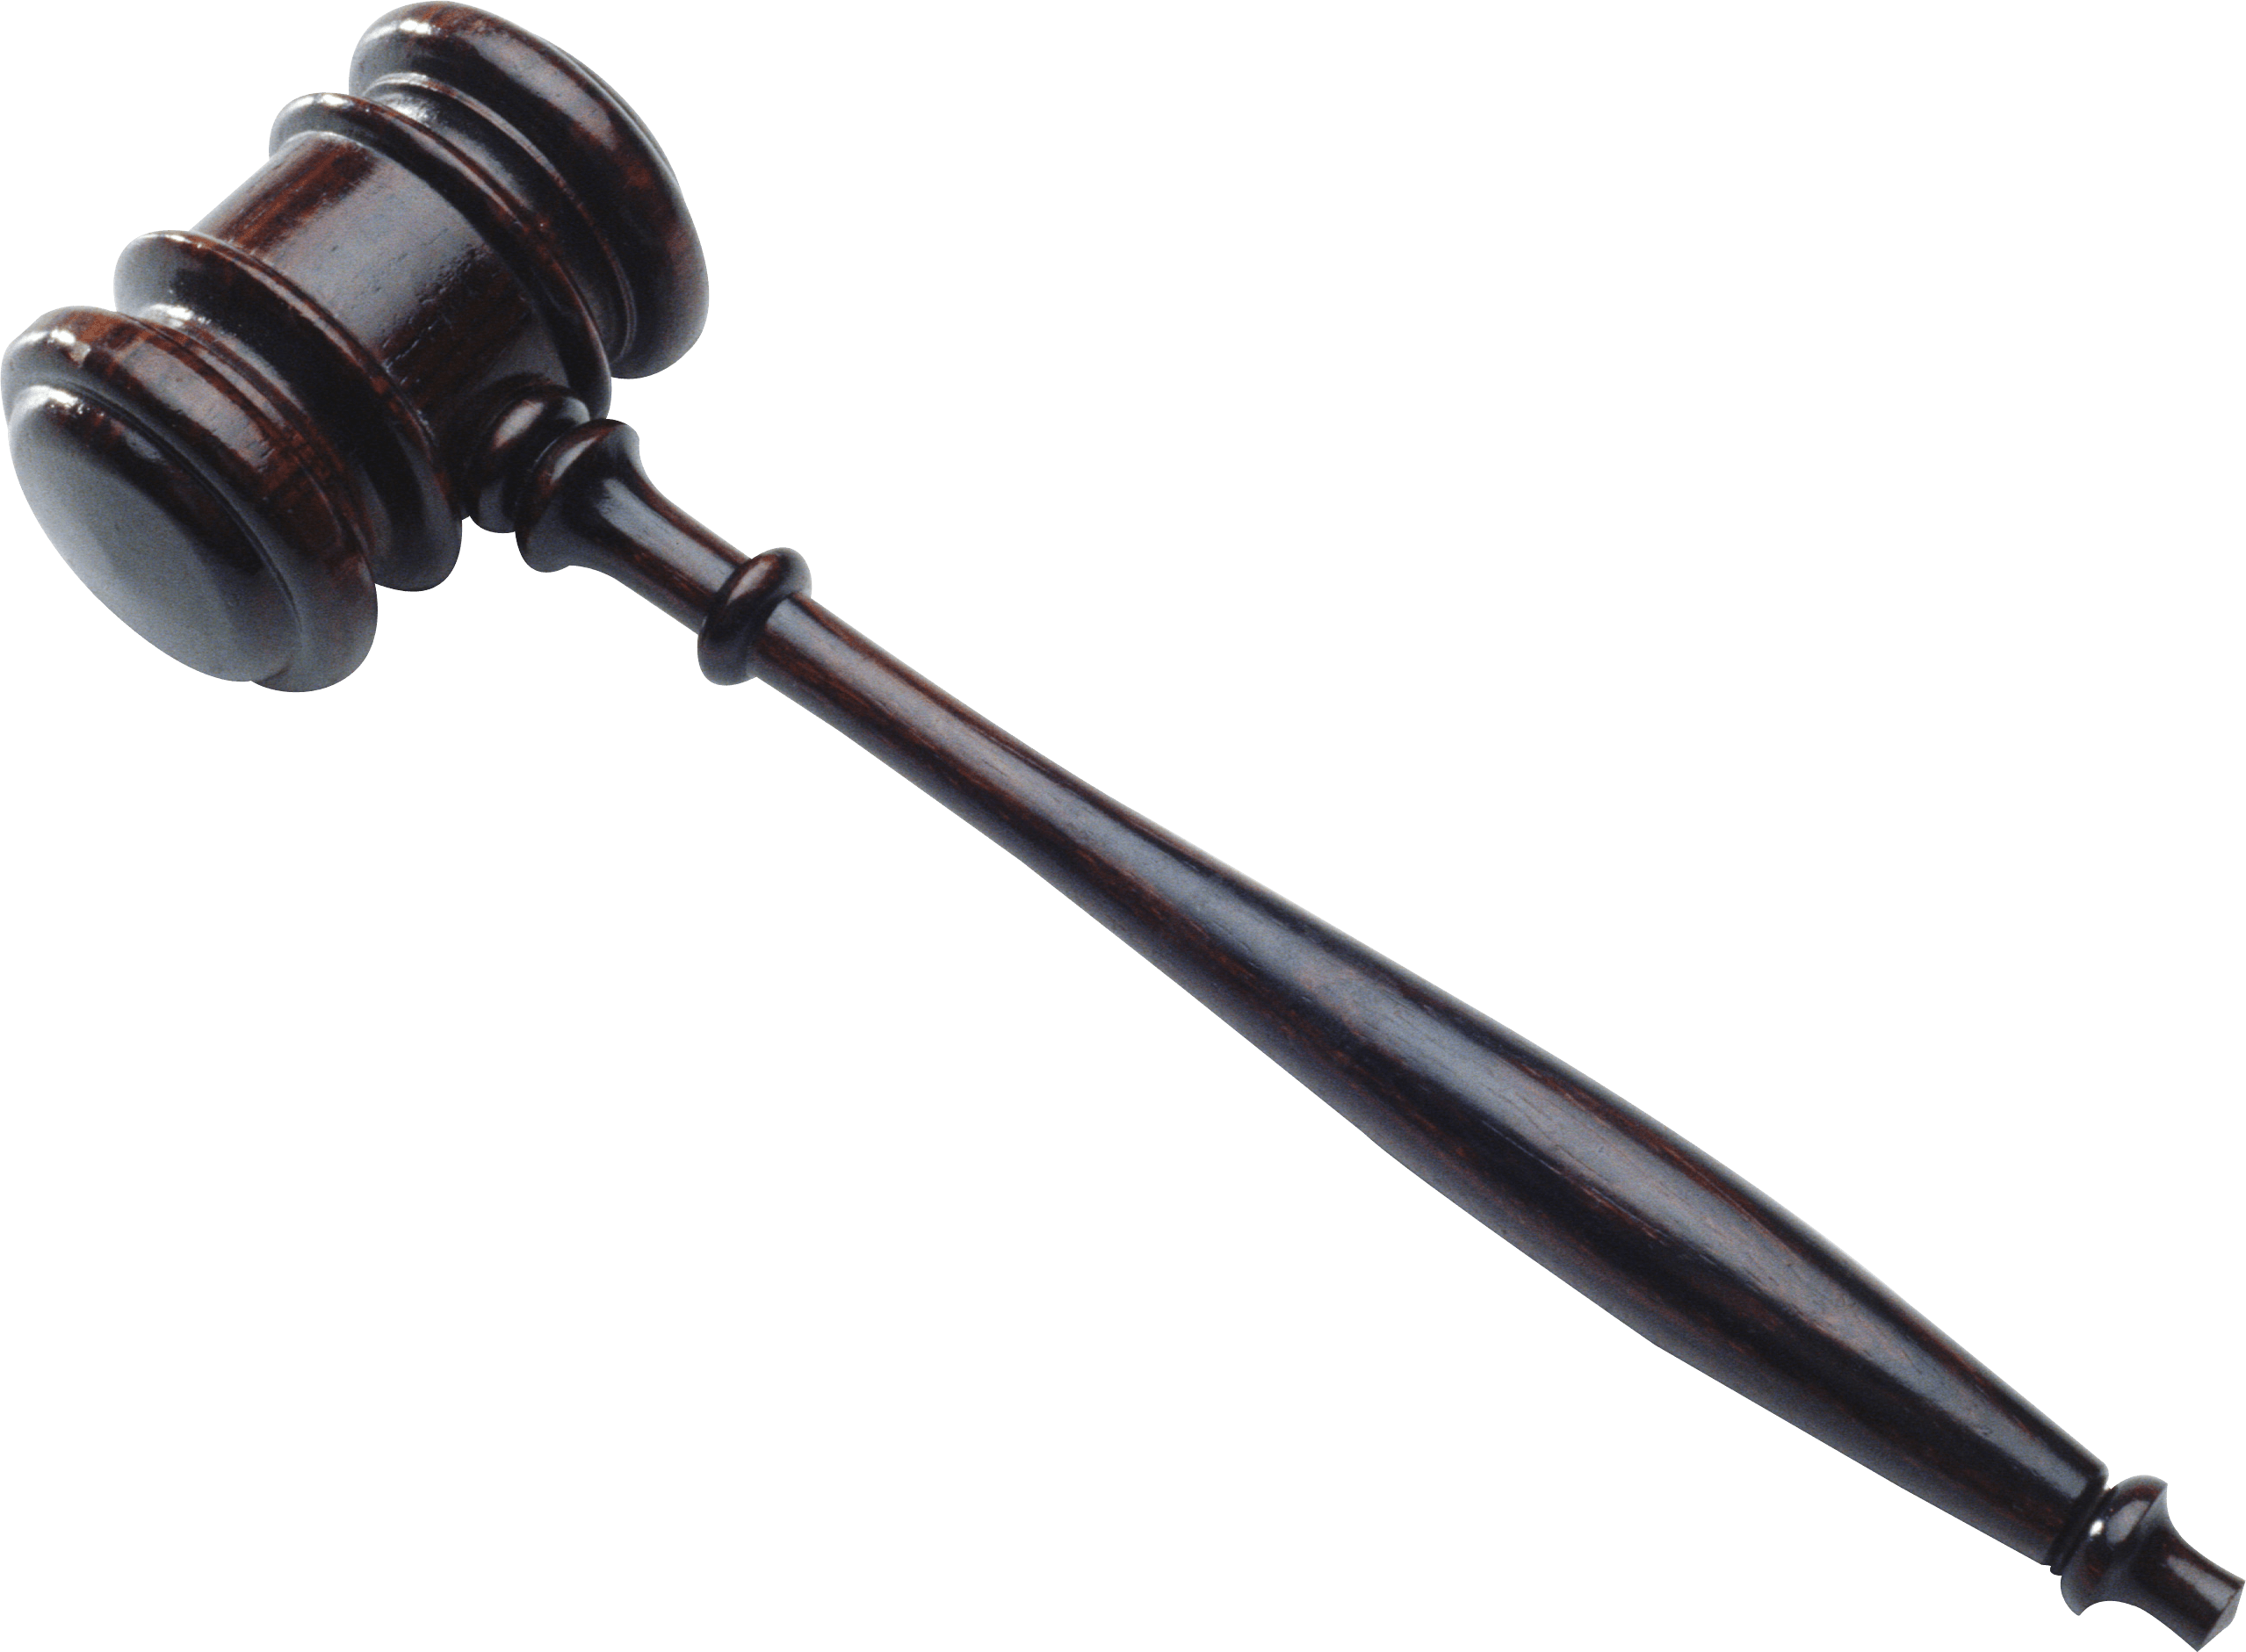 justice clipart mallet